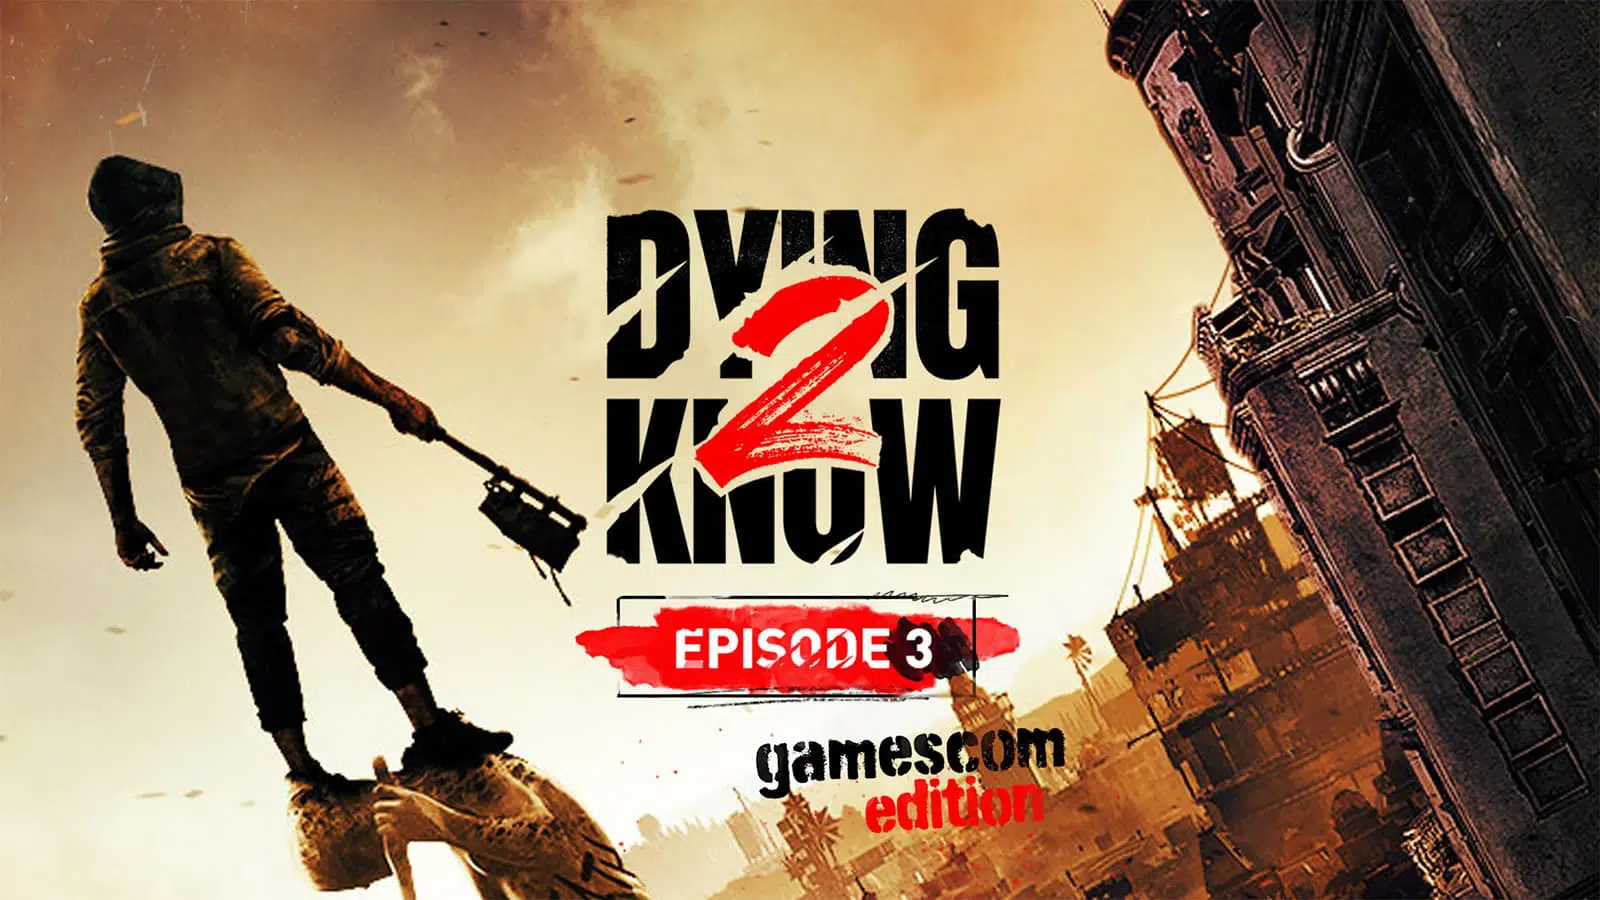 dying light 2 dying2know 3 gamescom edition